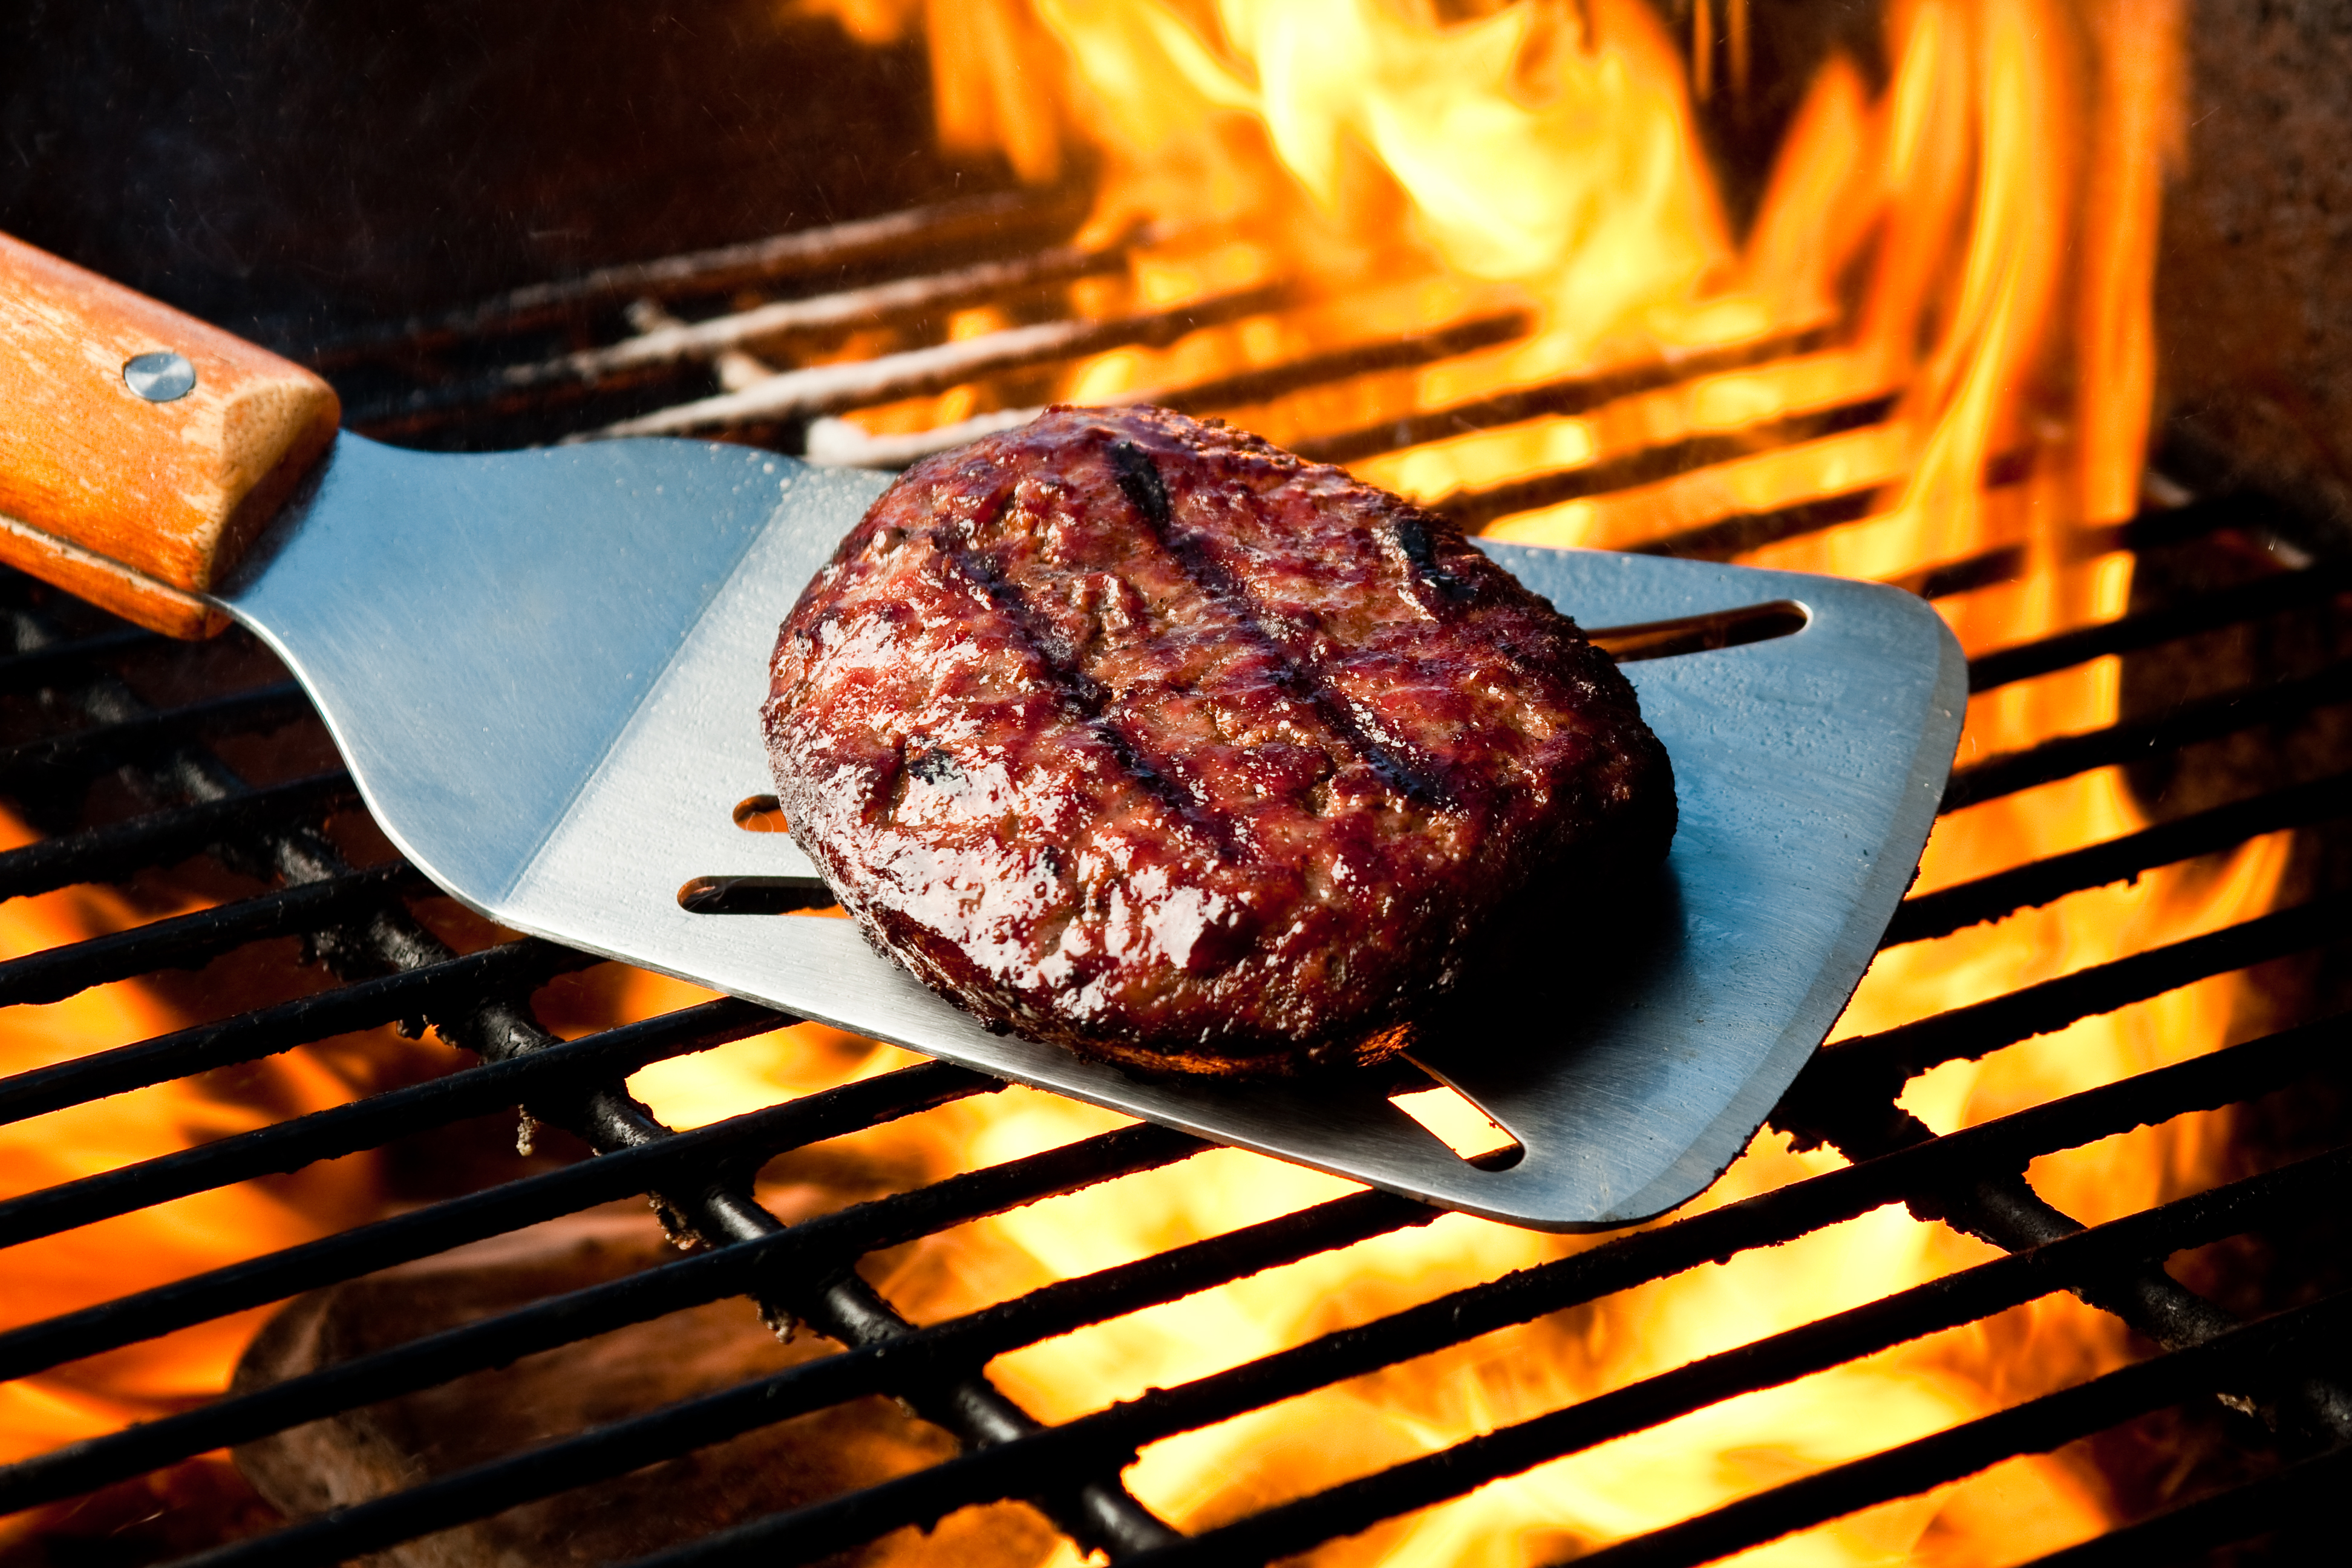 One important lesson for first-time grillers is to remember that color is never a reliable indicator of safety and doneness. Use a food thermometer to ensure safe internal temperatures.